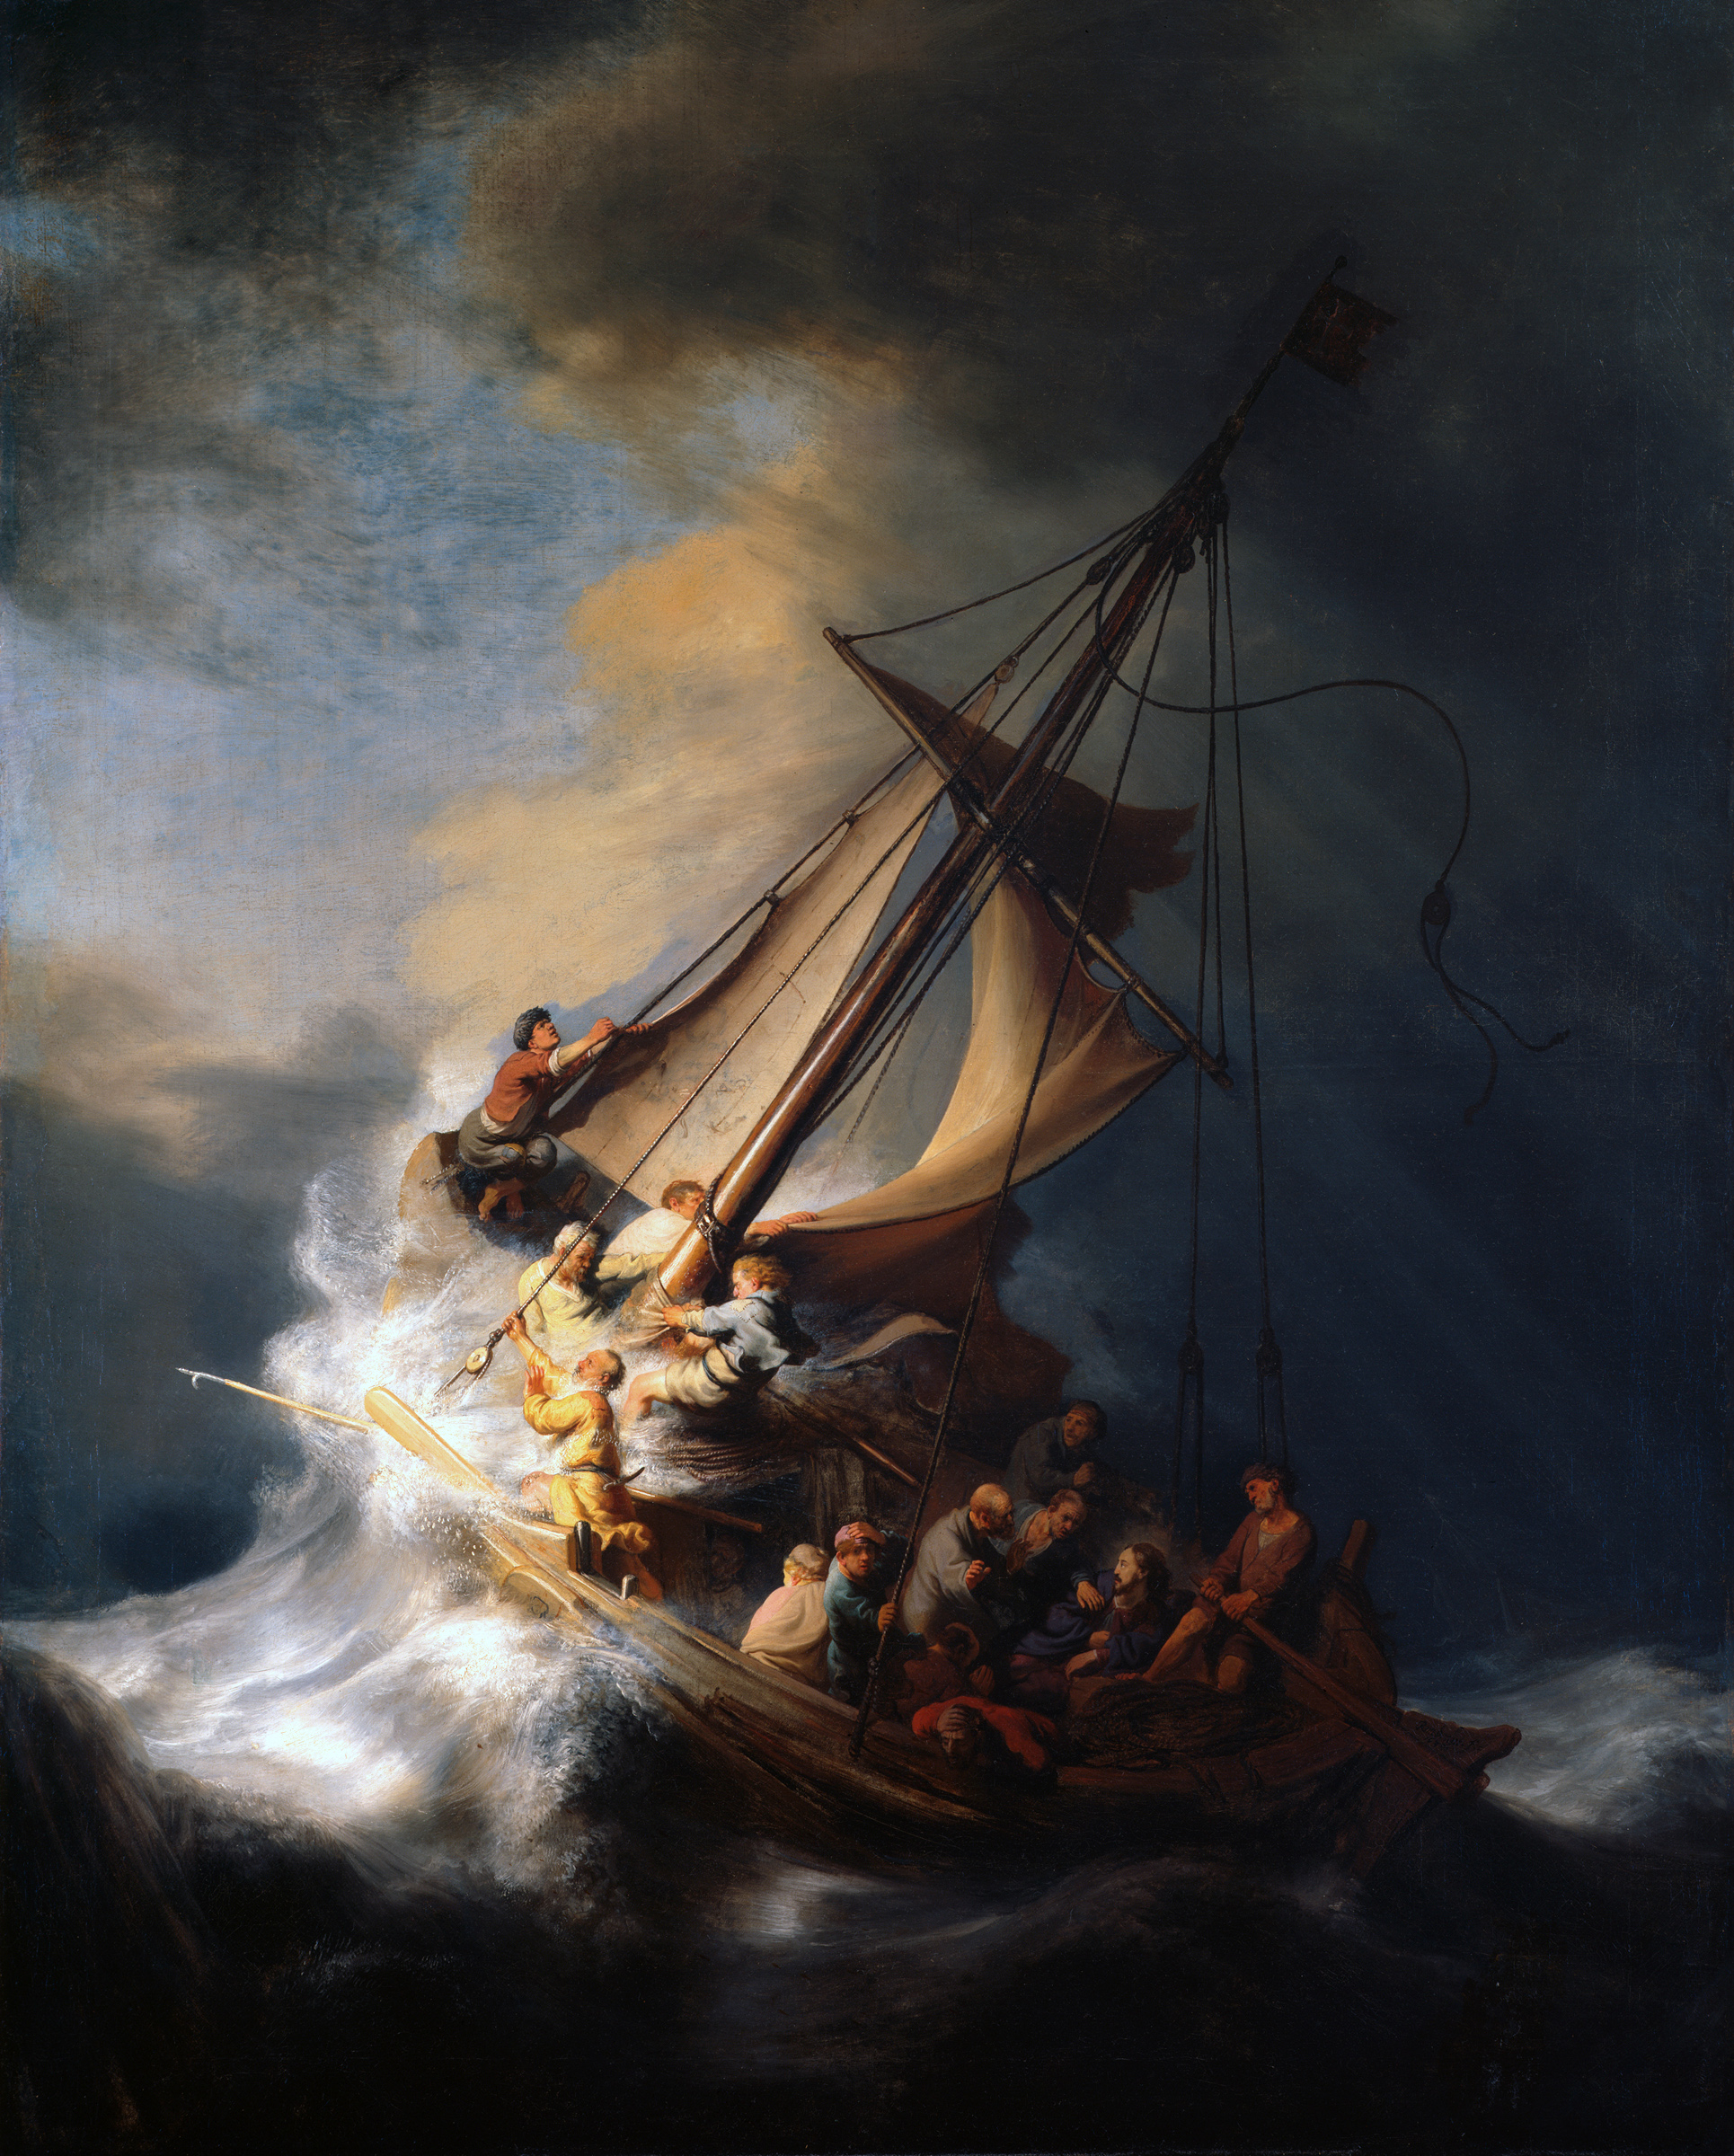 13-09-01 BLOG Image of the month -The Storm on the Sea of Galilee